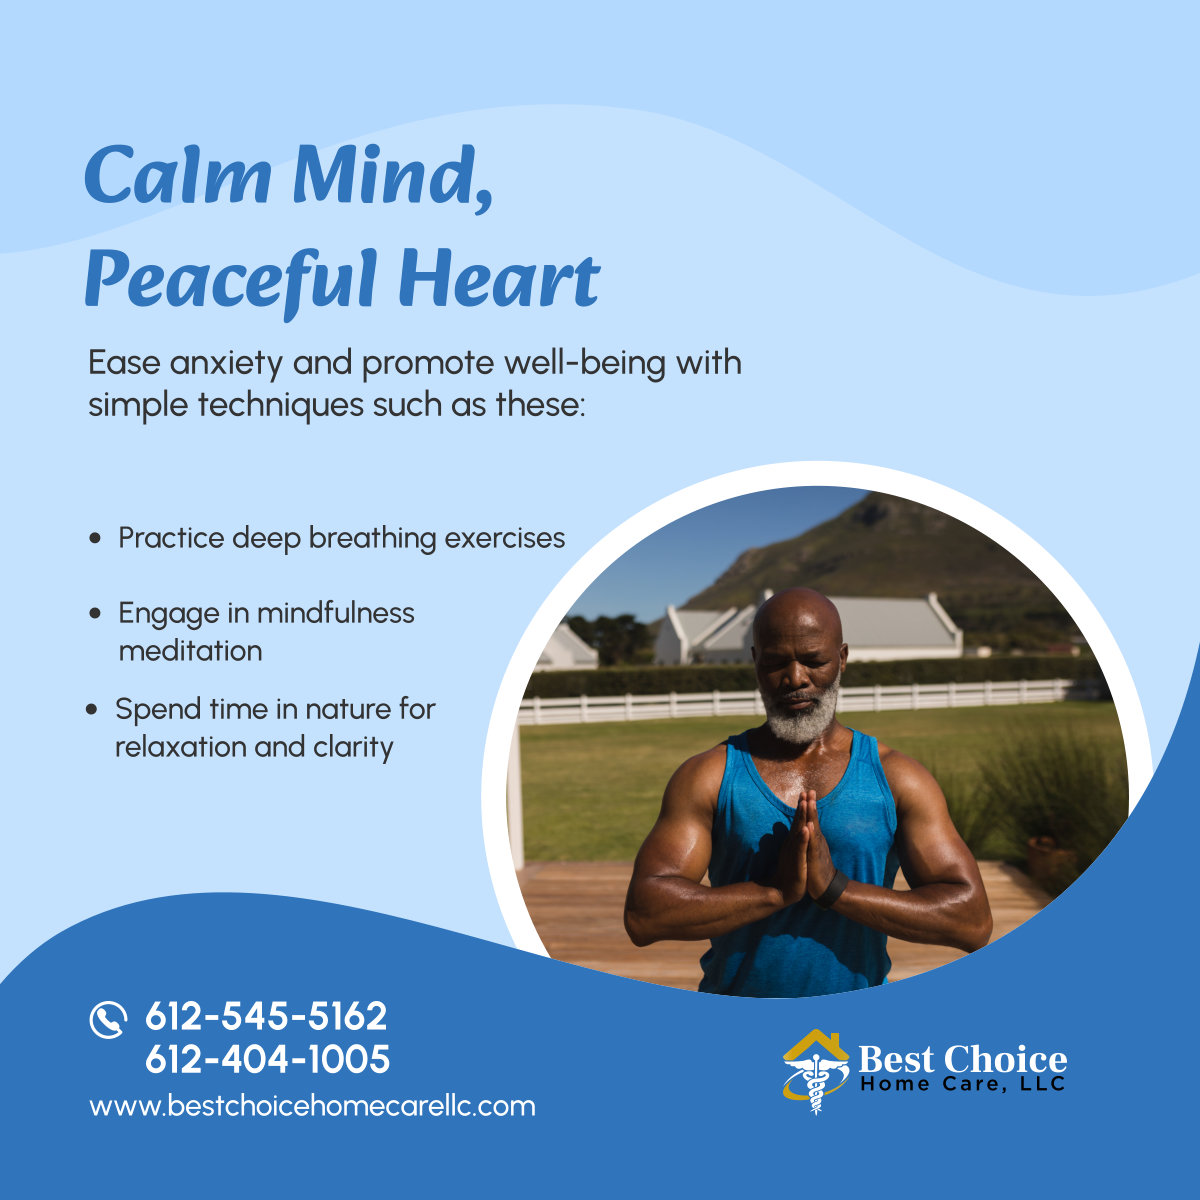 Find peace amidst life's challenges. Try these simple techniques to ease anxiety and promote mental well-being.

#MinneapolisMN #HomeCareAgency #MentalHealthTips